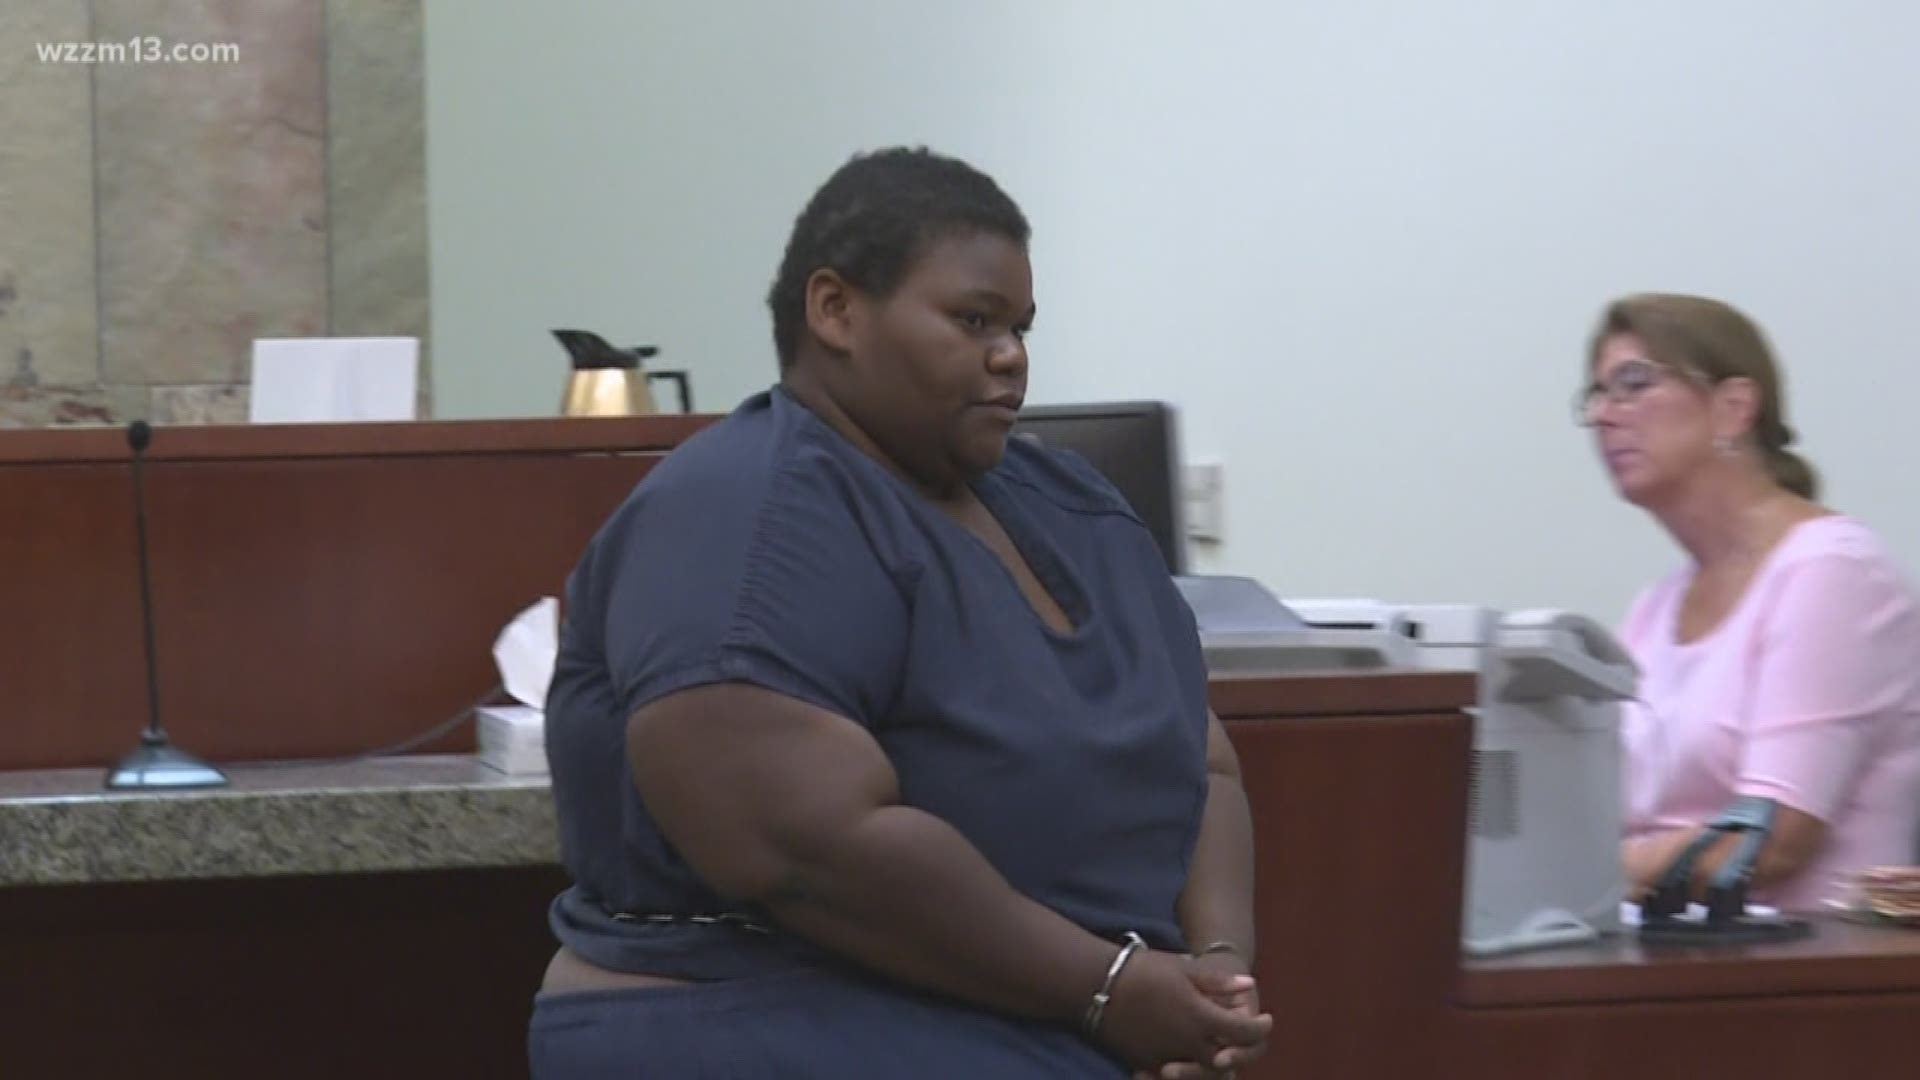 Woman charged with kidnapping appears in court